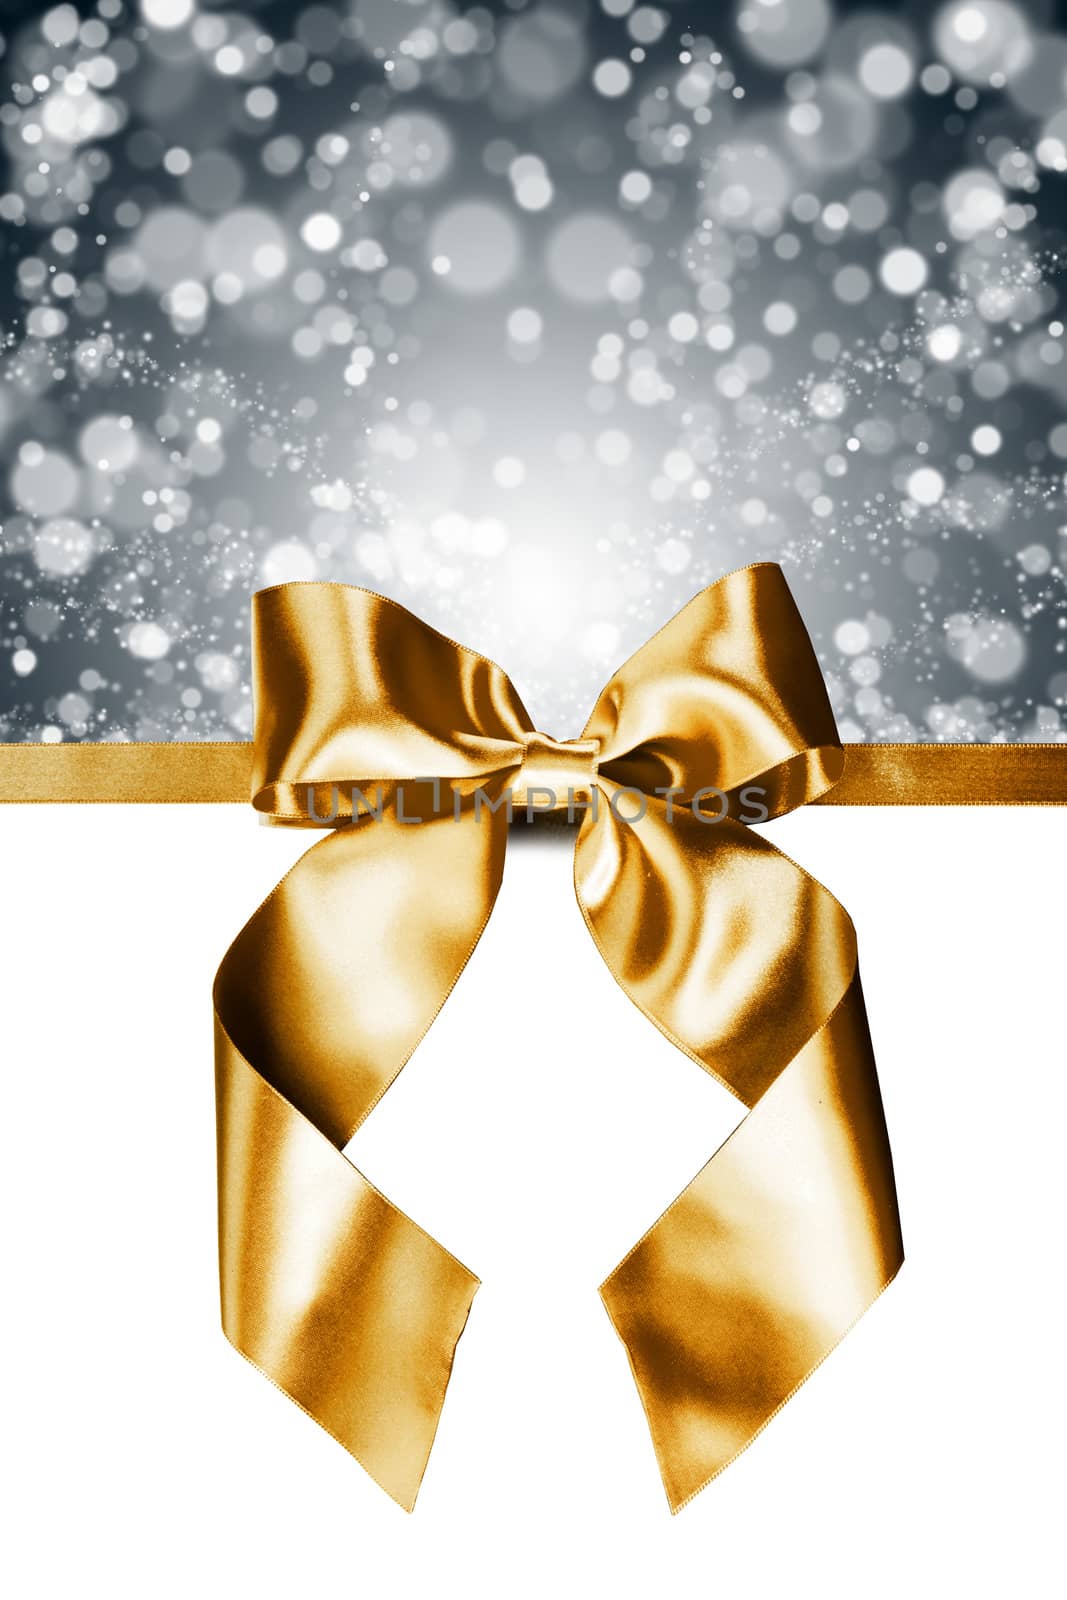 Golden gift ribbon bow and bokeh isolated on white background